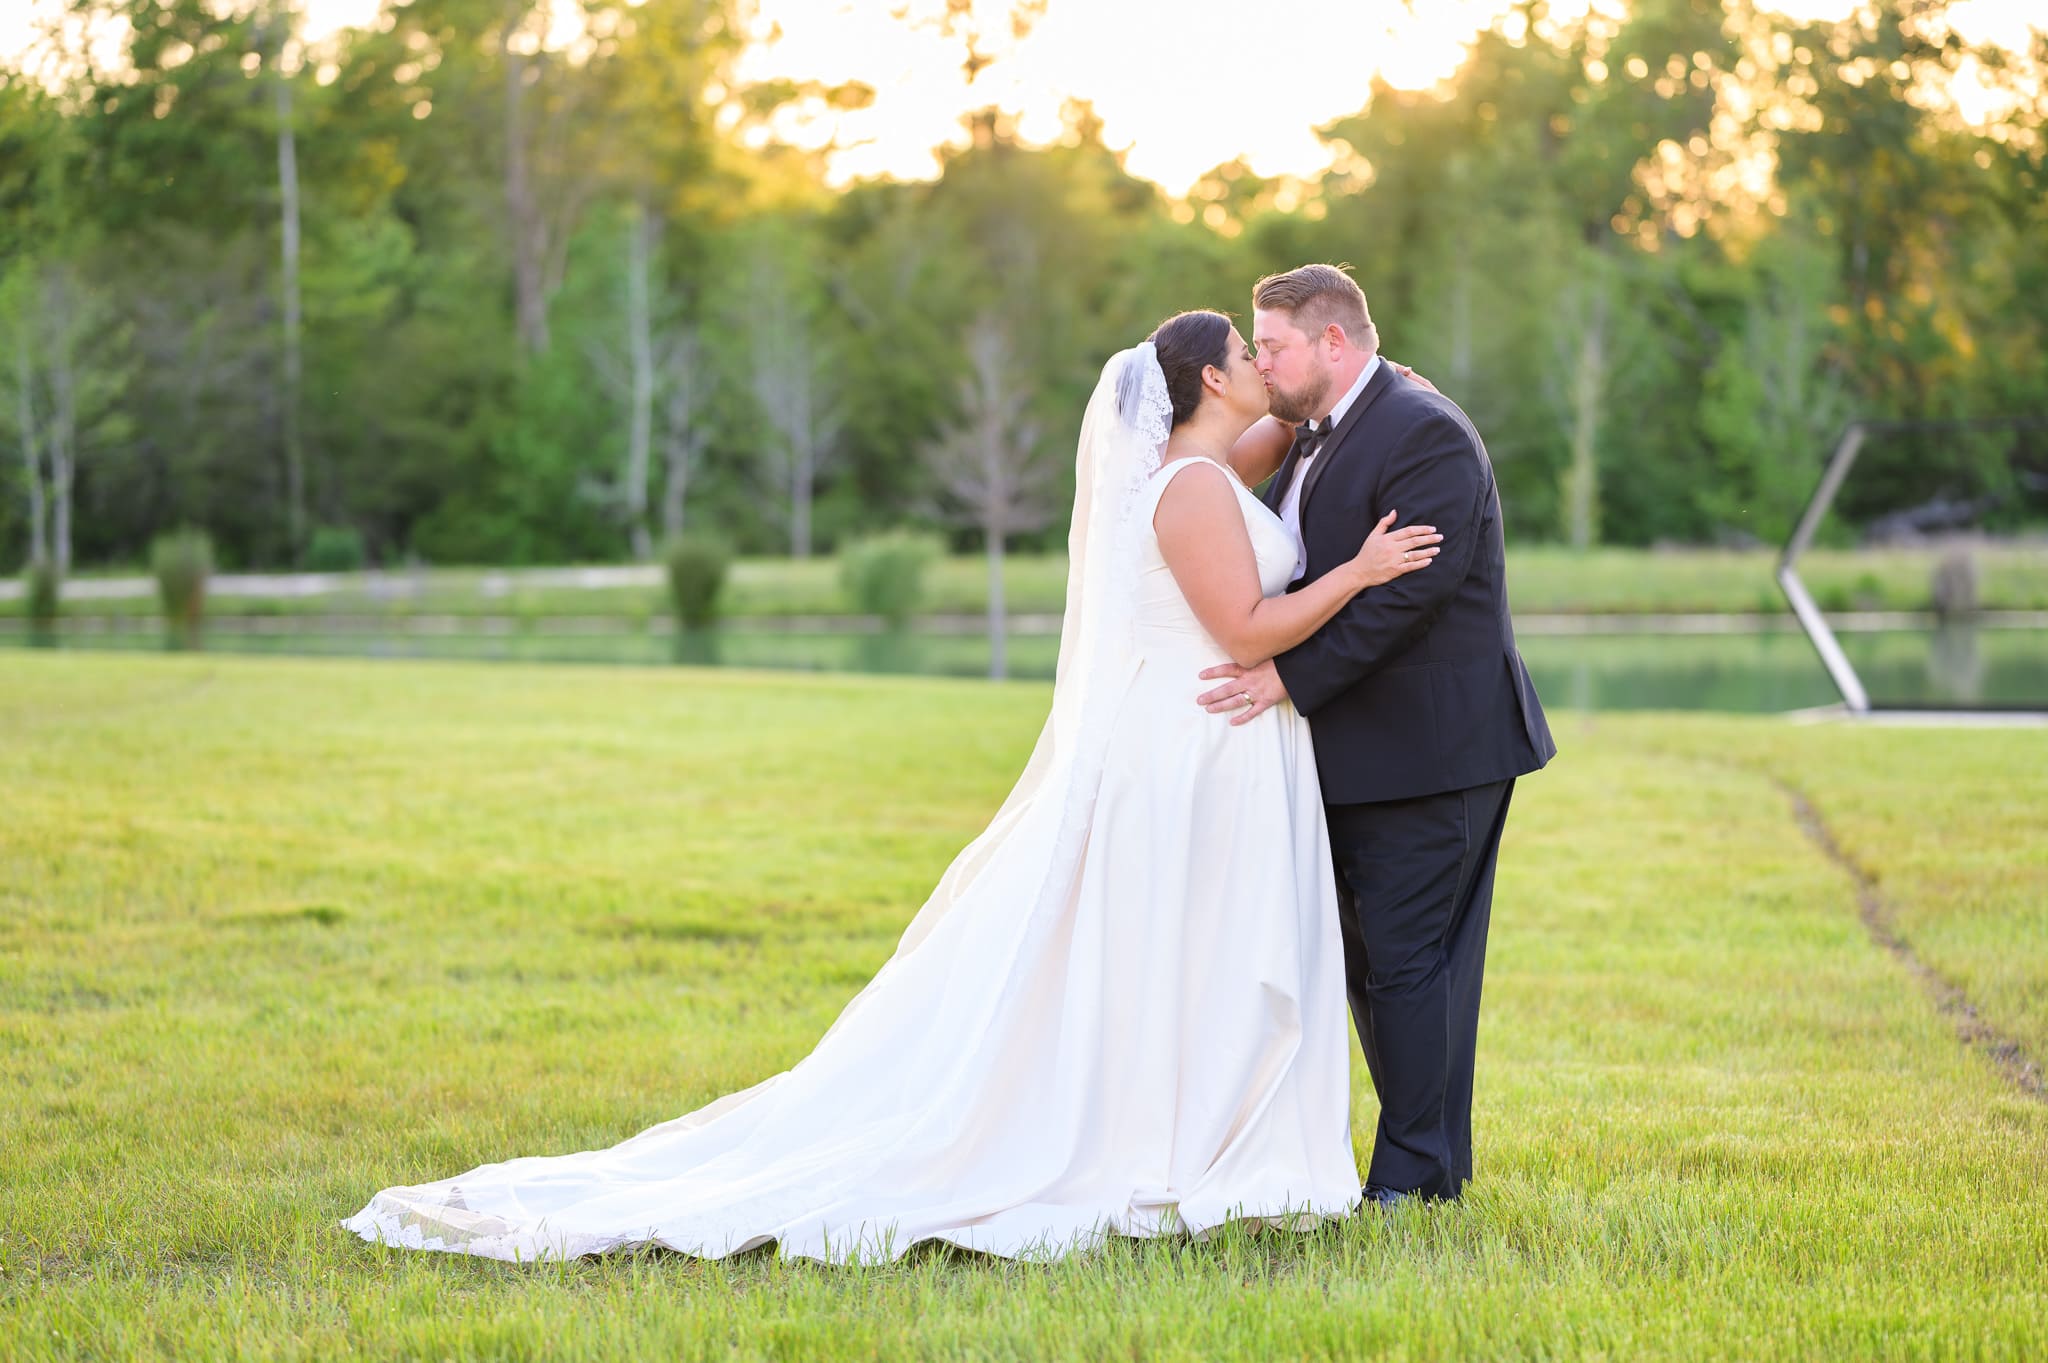 Portraits of bride and groom in the sunset by the lake - The Venue at White Oaks Farm